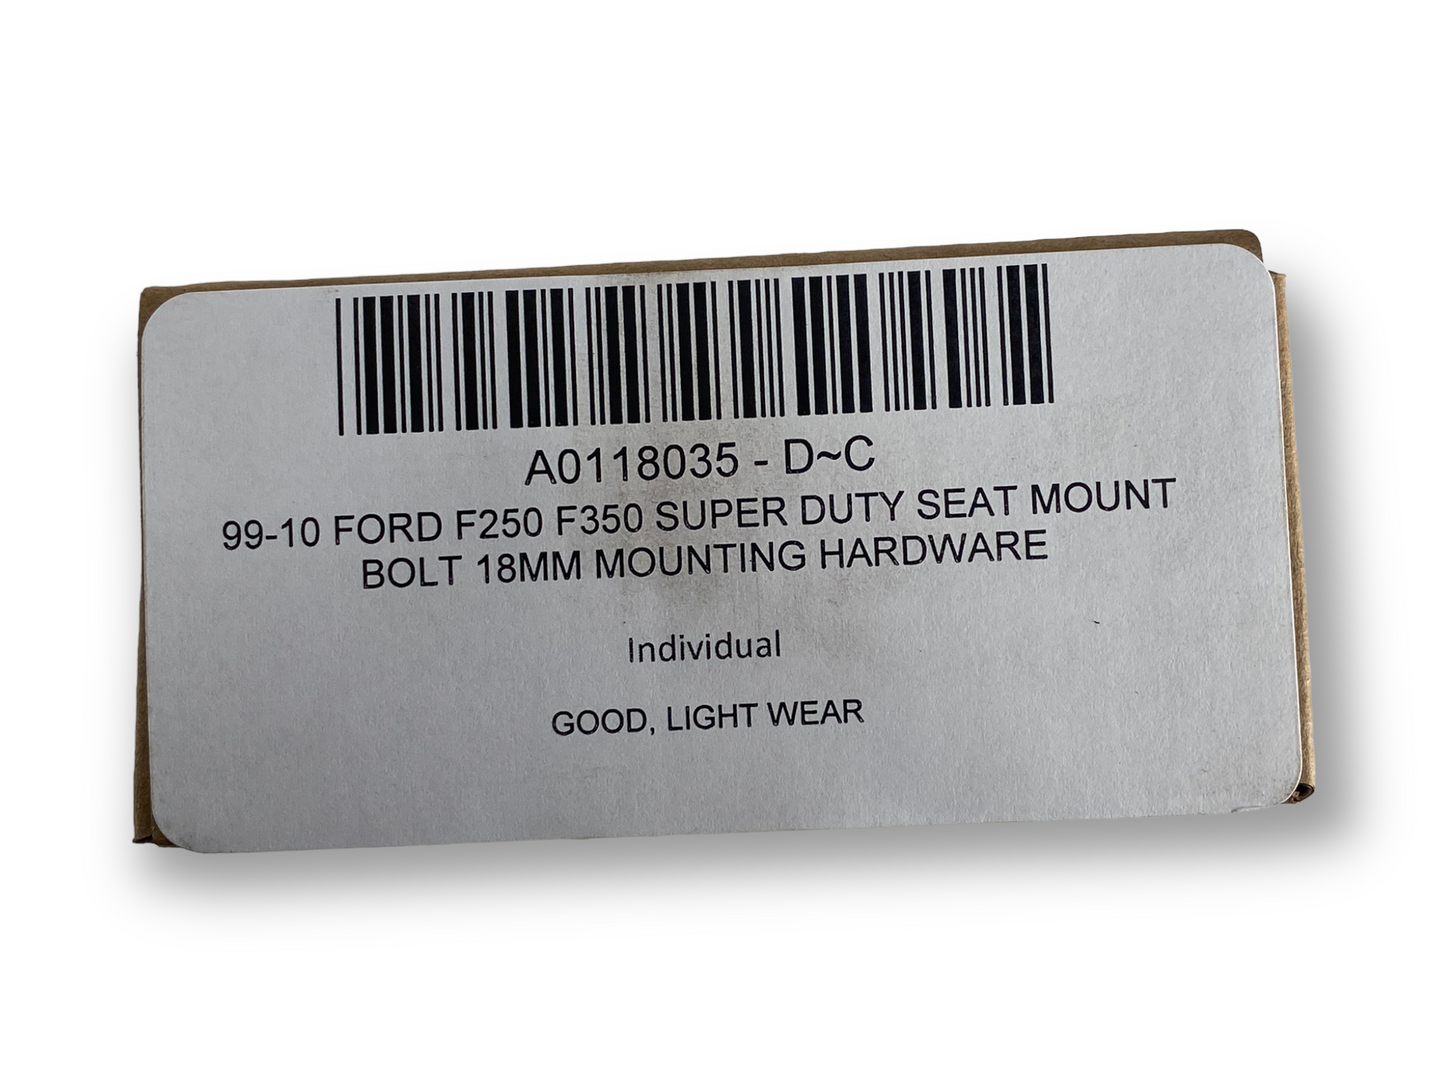 99-10 Ford F250 F350 Super Duty Seat Mount Bolt 18mm Mounting Hardware